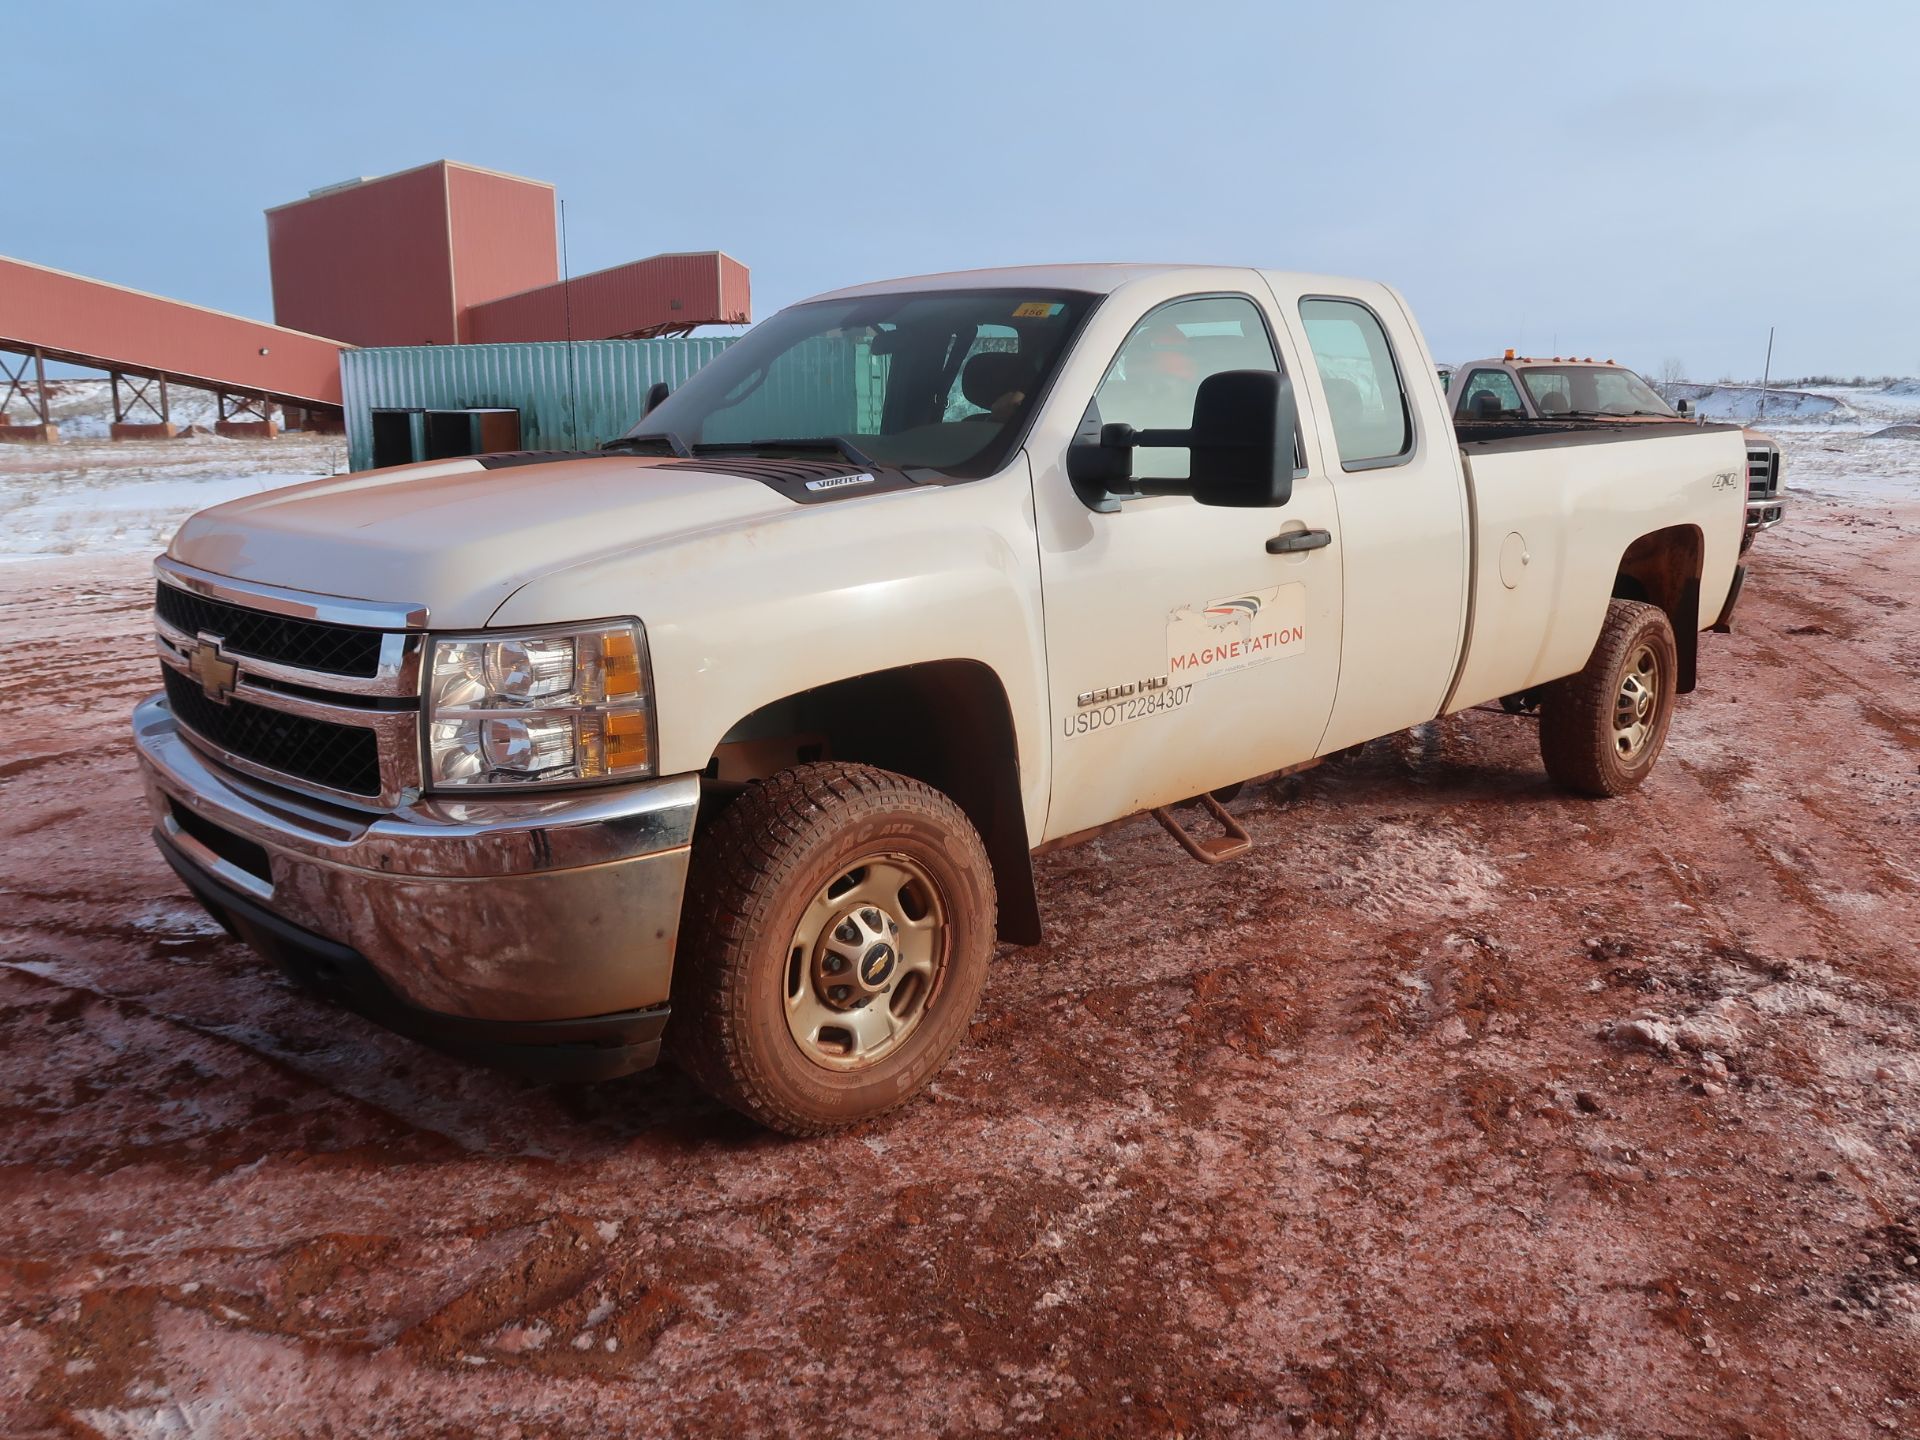 2011 Chevy 4x4 pickup truck, model 2500HD WT - Image 2 of 3